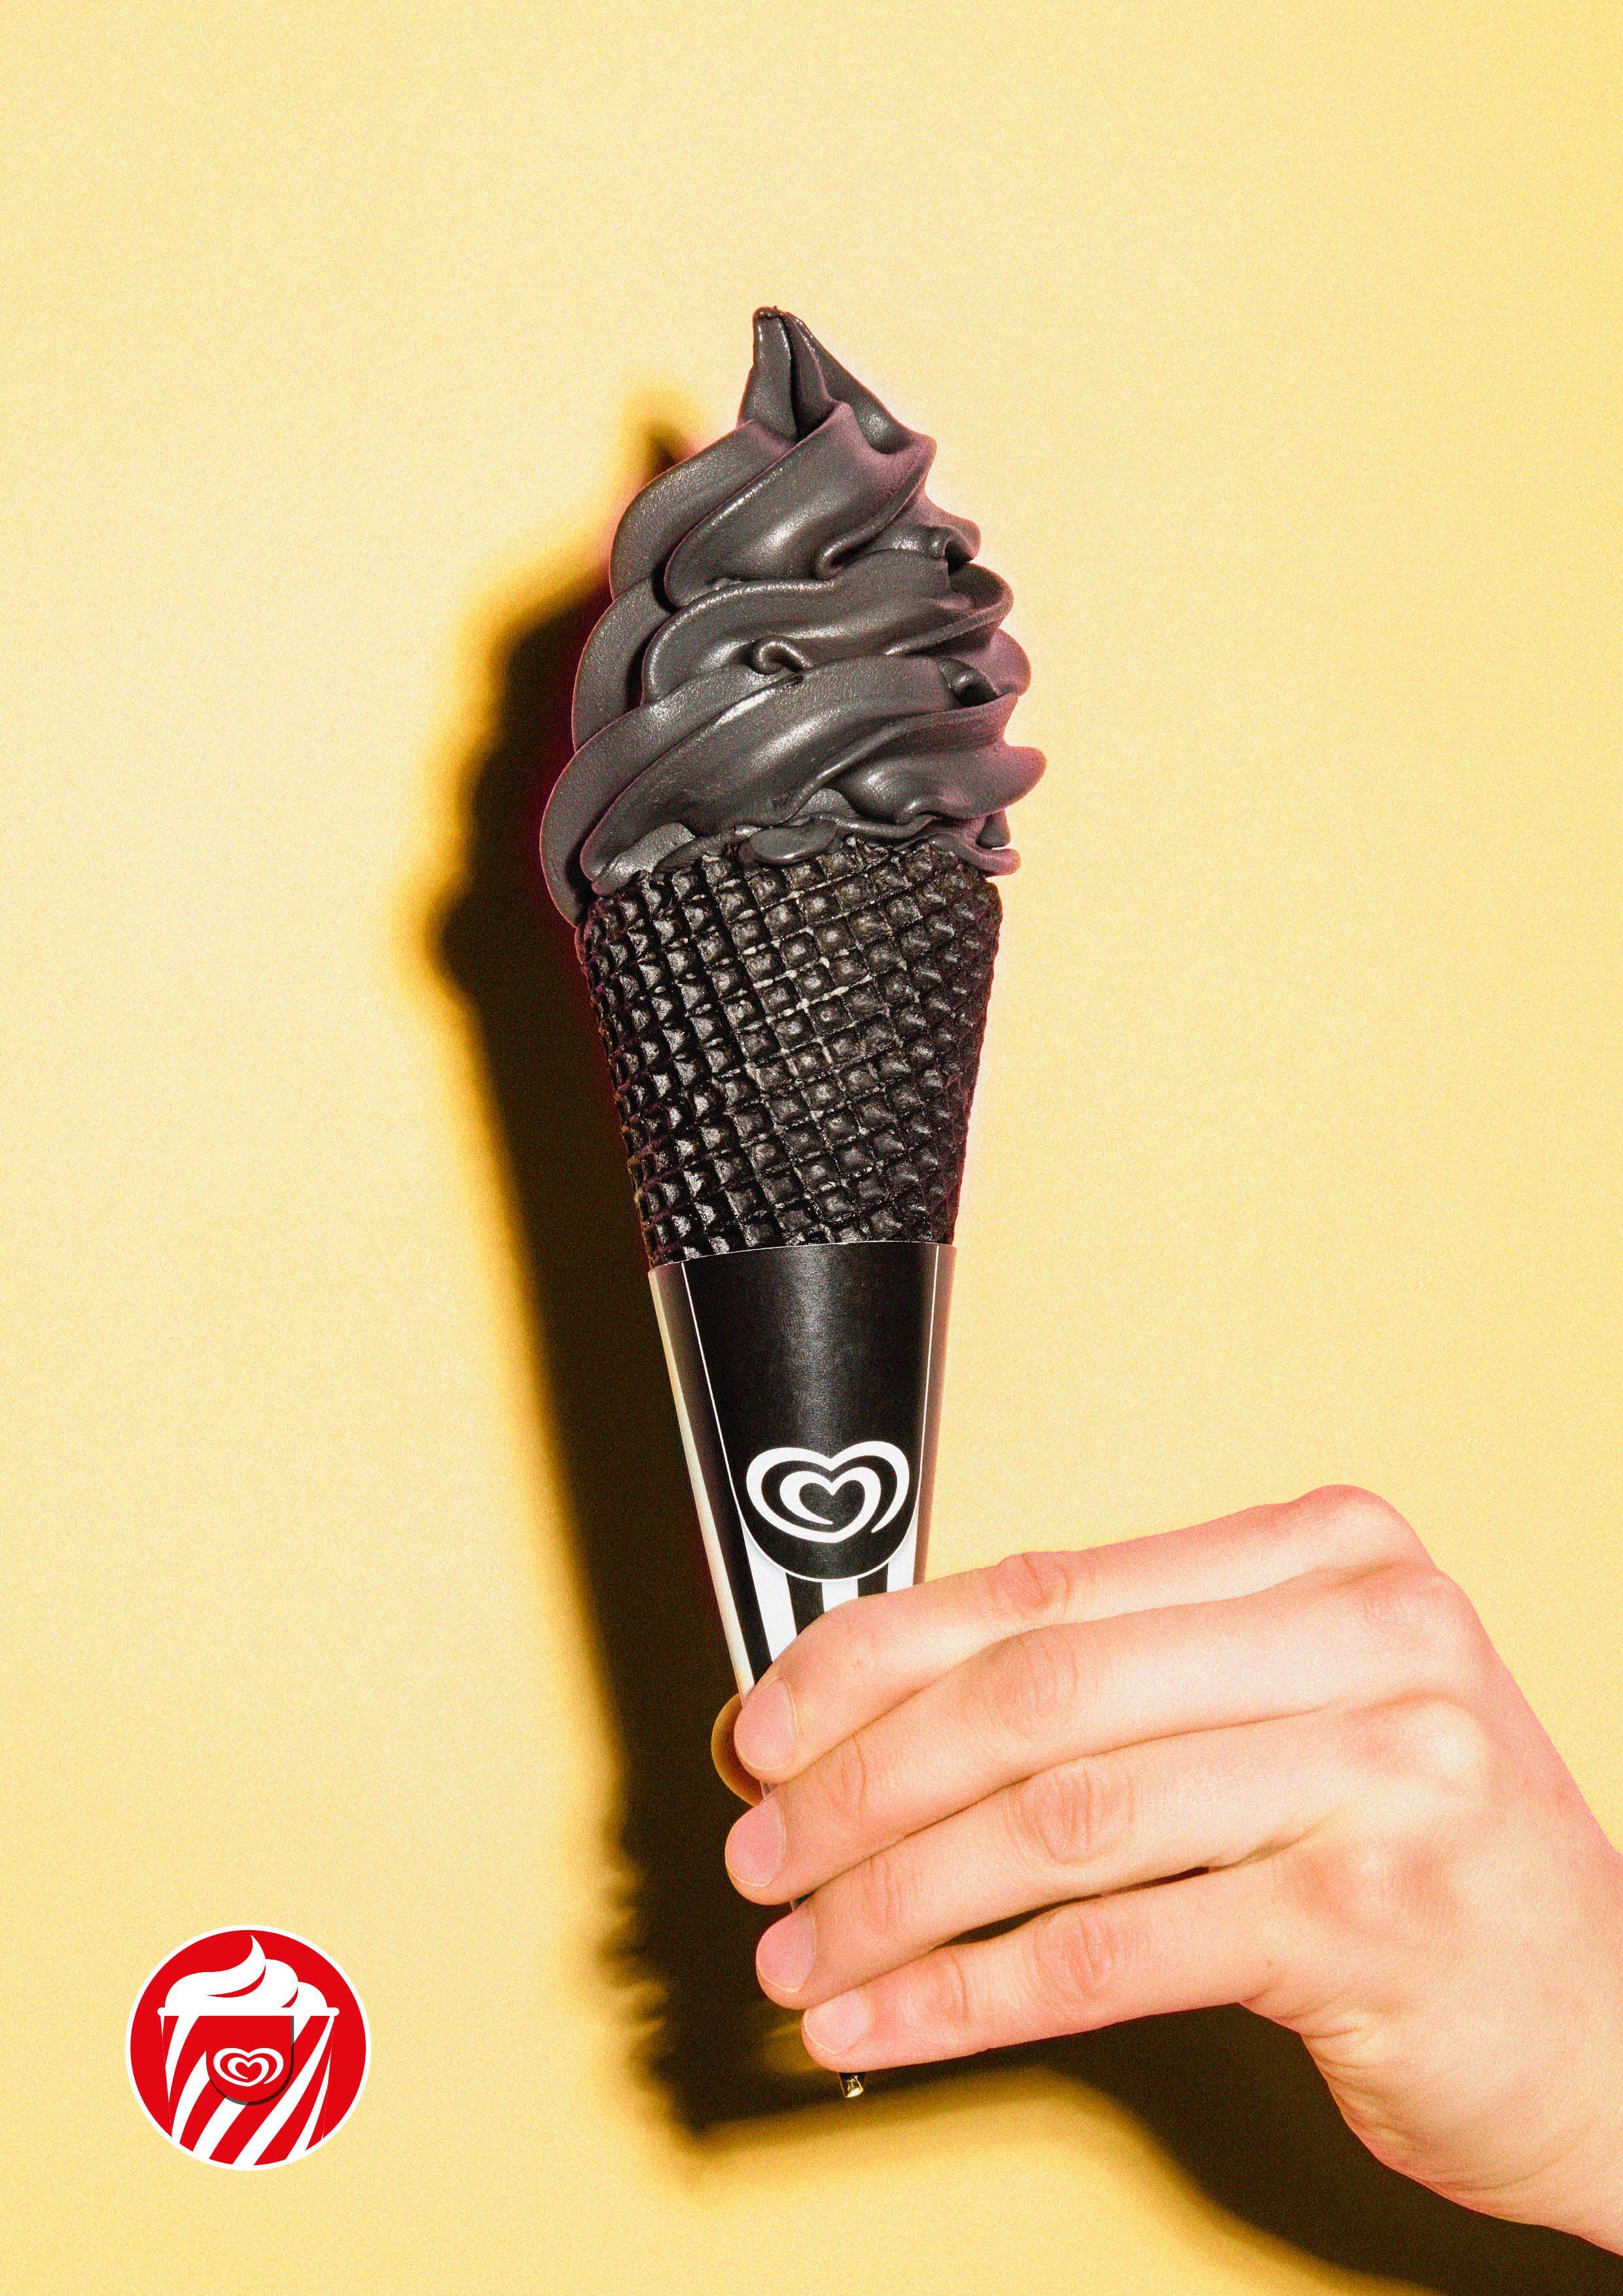 Yellow and Black Swirl Logo - Frozen blackout: Swirl's brings black ice cream to the Netherlands